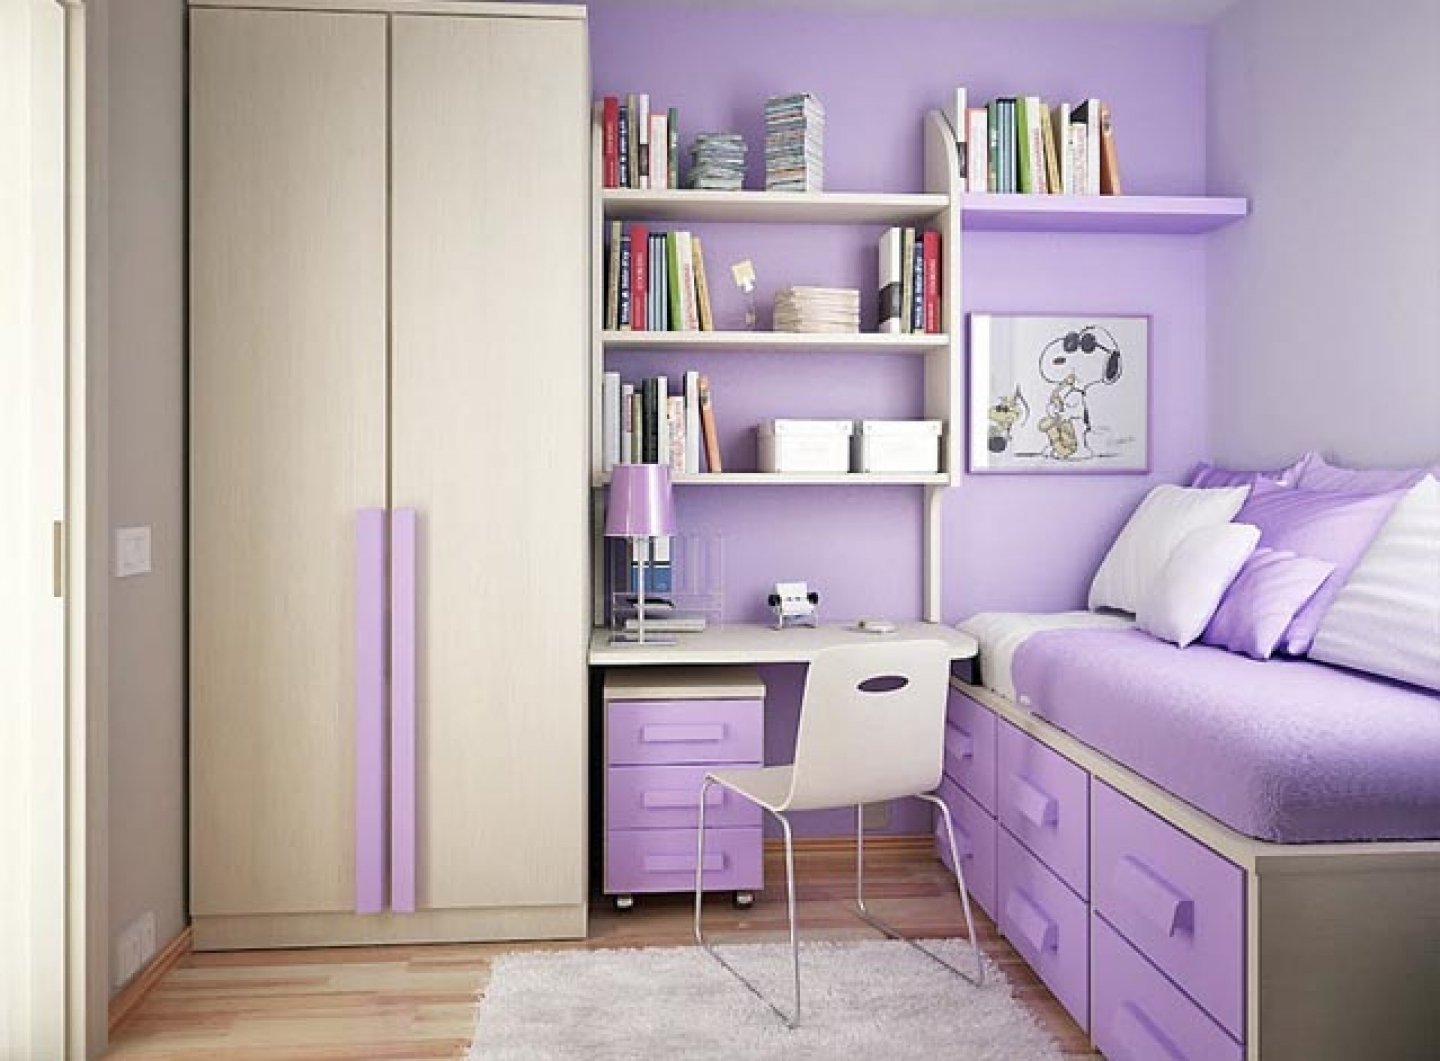 10 Most Recommended Small Bedroom Ideas For Teenage Girls awesome cute bedroom ideas for small rooms womenmisbehavin 1 2022